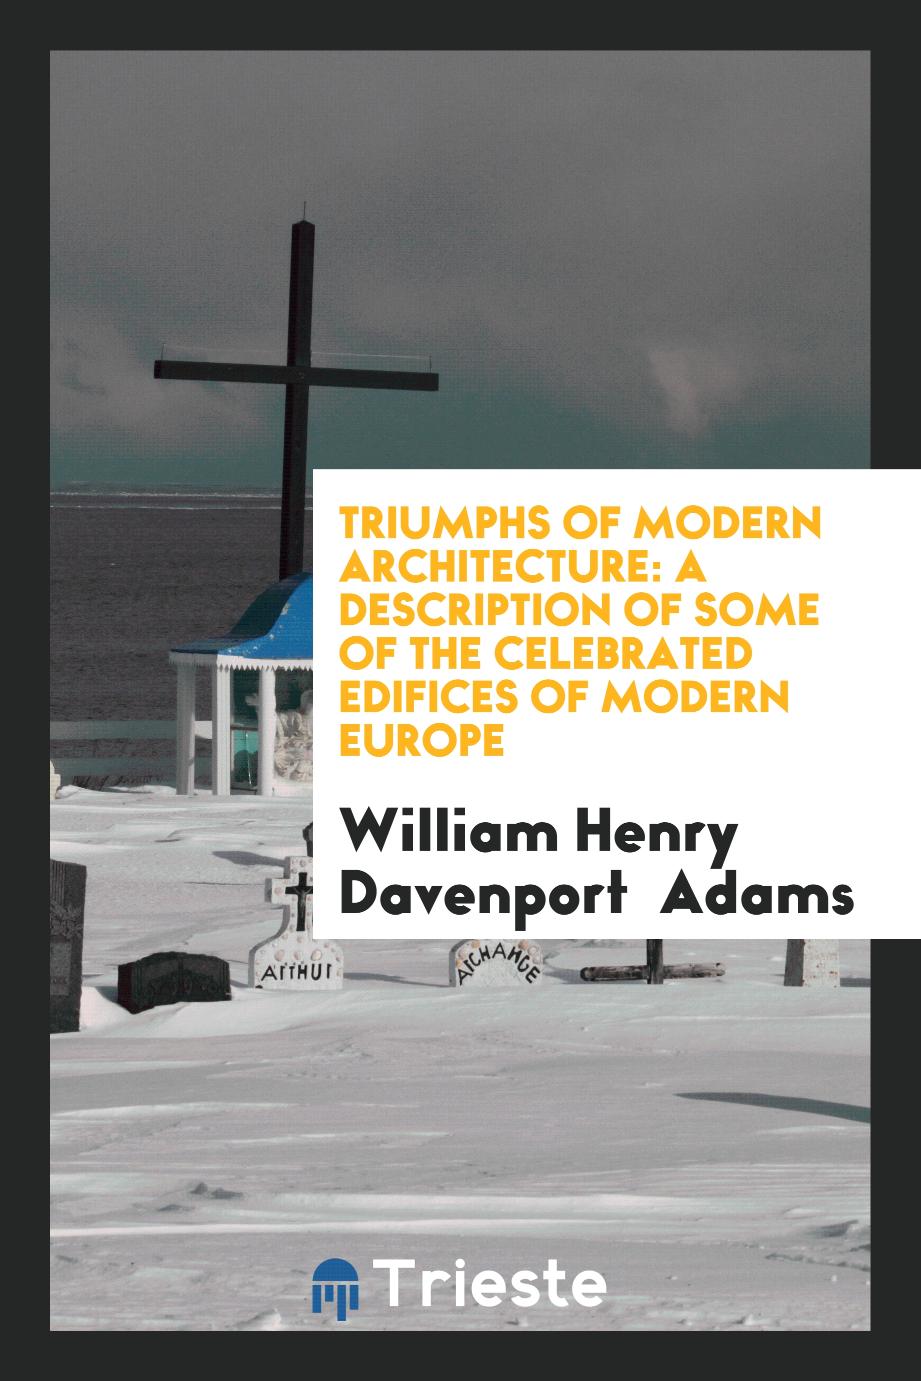 Triumphs of Modern Architecture: A Description of Some of the Celebrated Edifices of Modern Europe